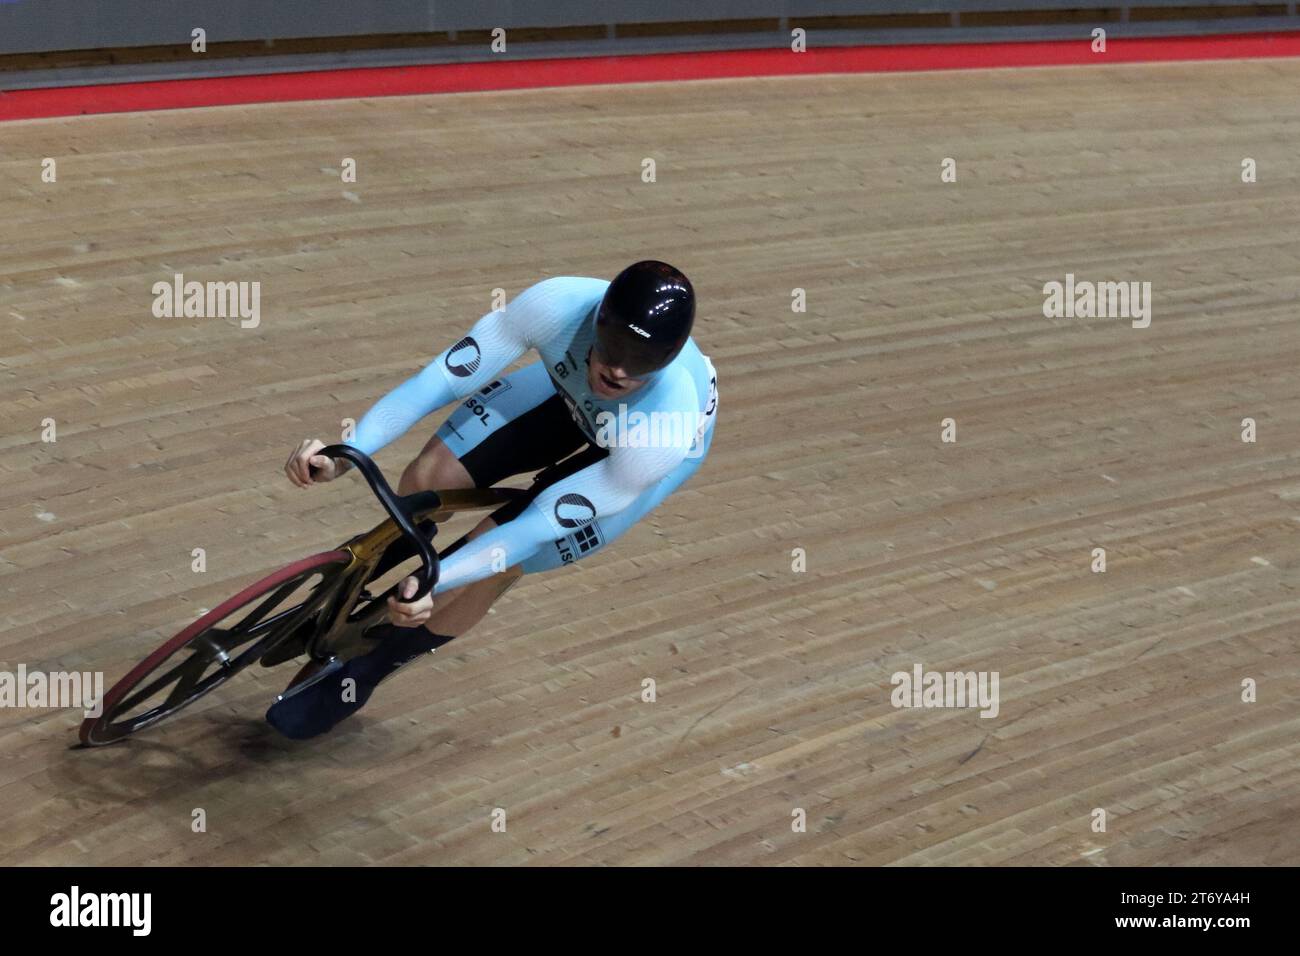 Track Cycling Champions League, Lee Valley Velodrome London UK. Harrie LAVREYSEN (NED) winning the Men's Sprint First Round Heat 6, 11th December 2023 Stock Photo